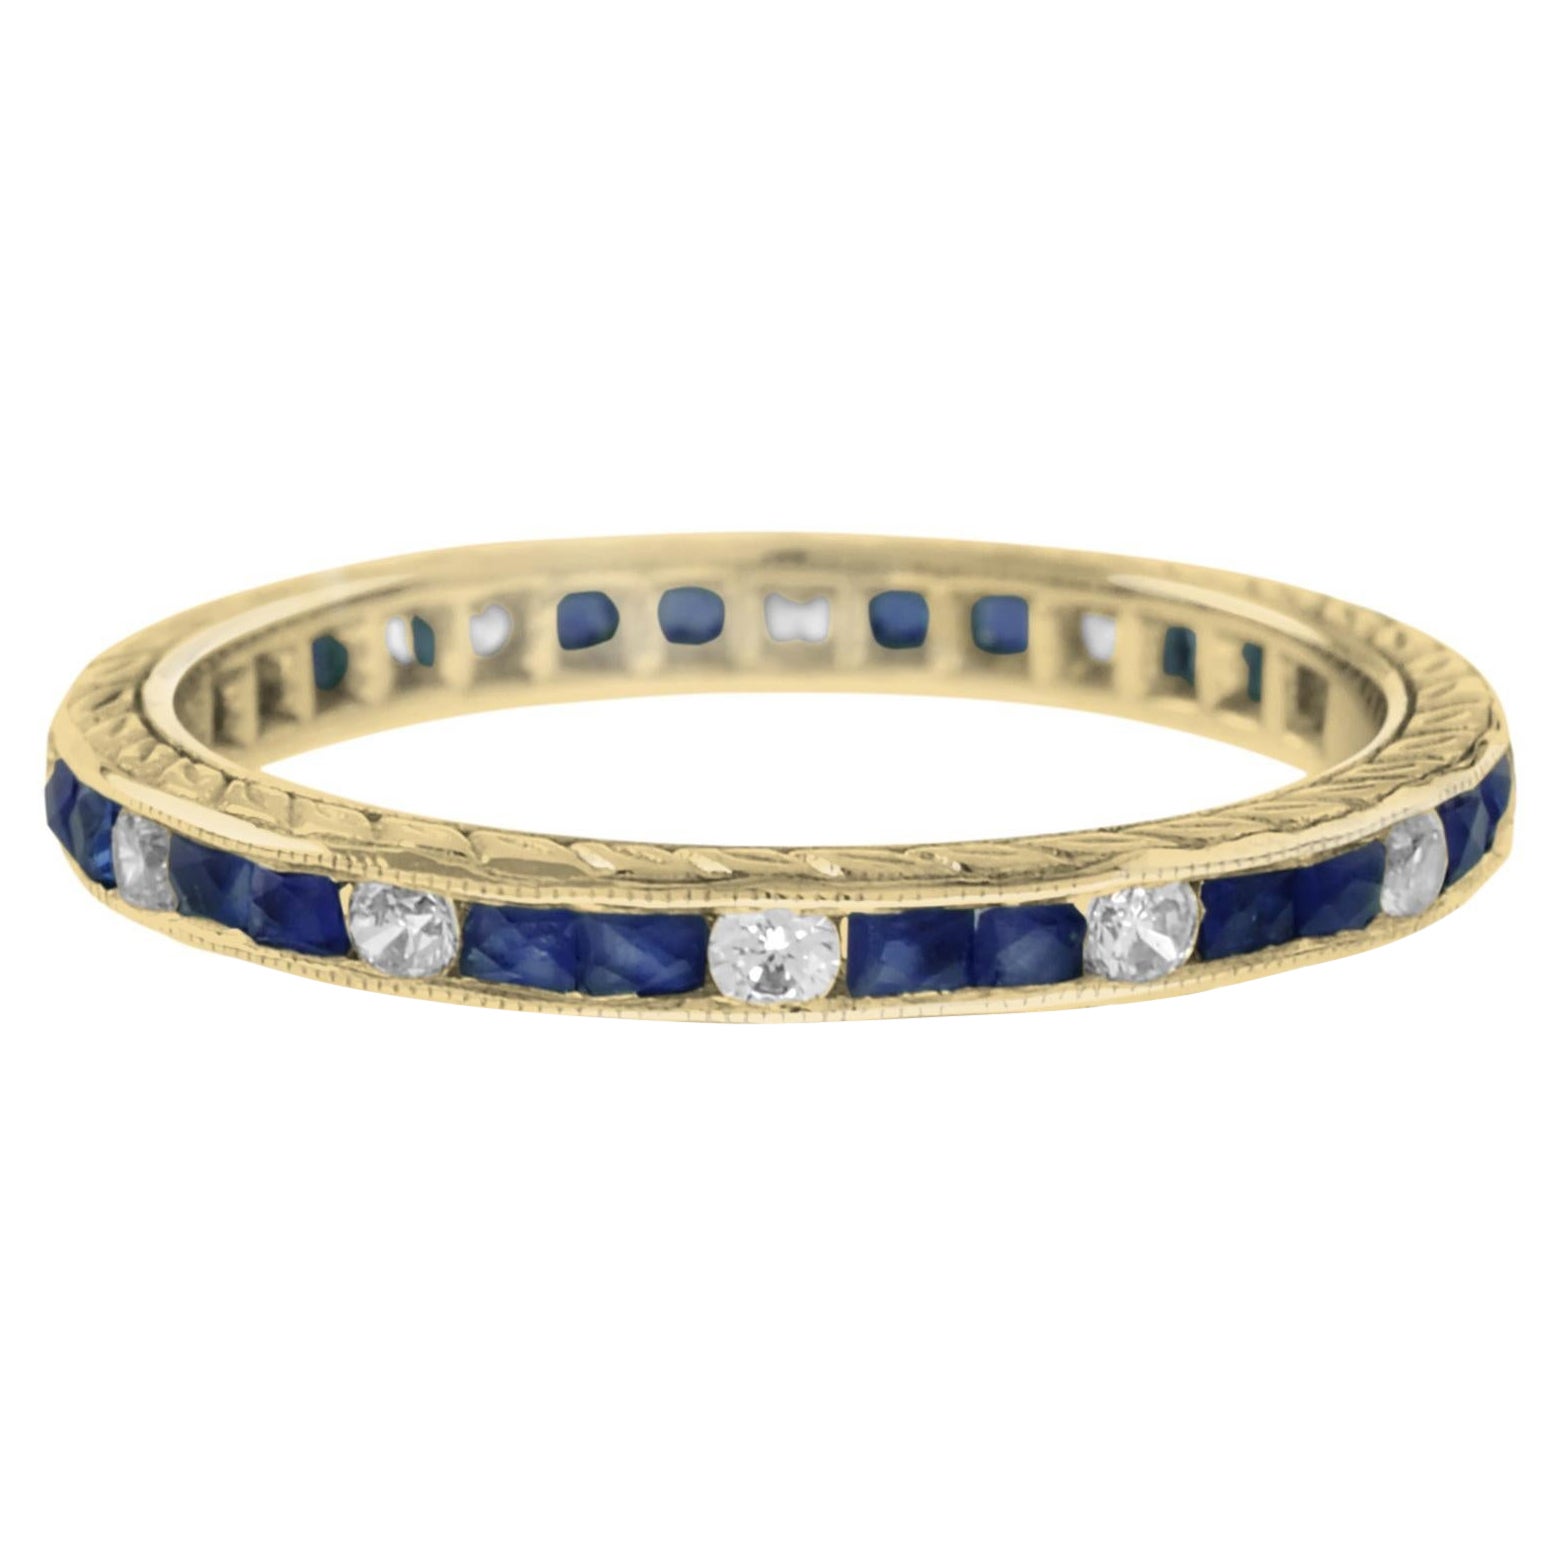 For Sale:  Alternating Double Sapphire and Diamond Eternity Ring in 14K Yellow Gold